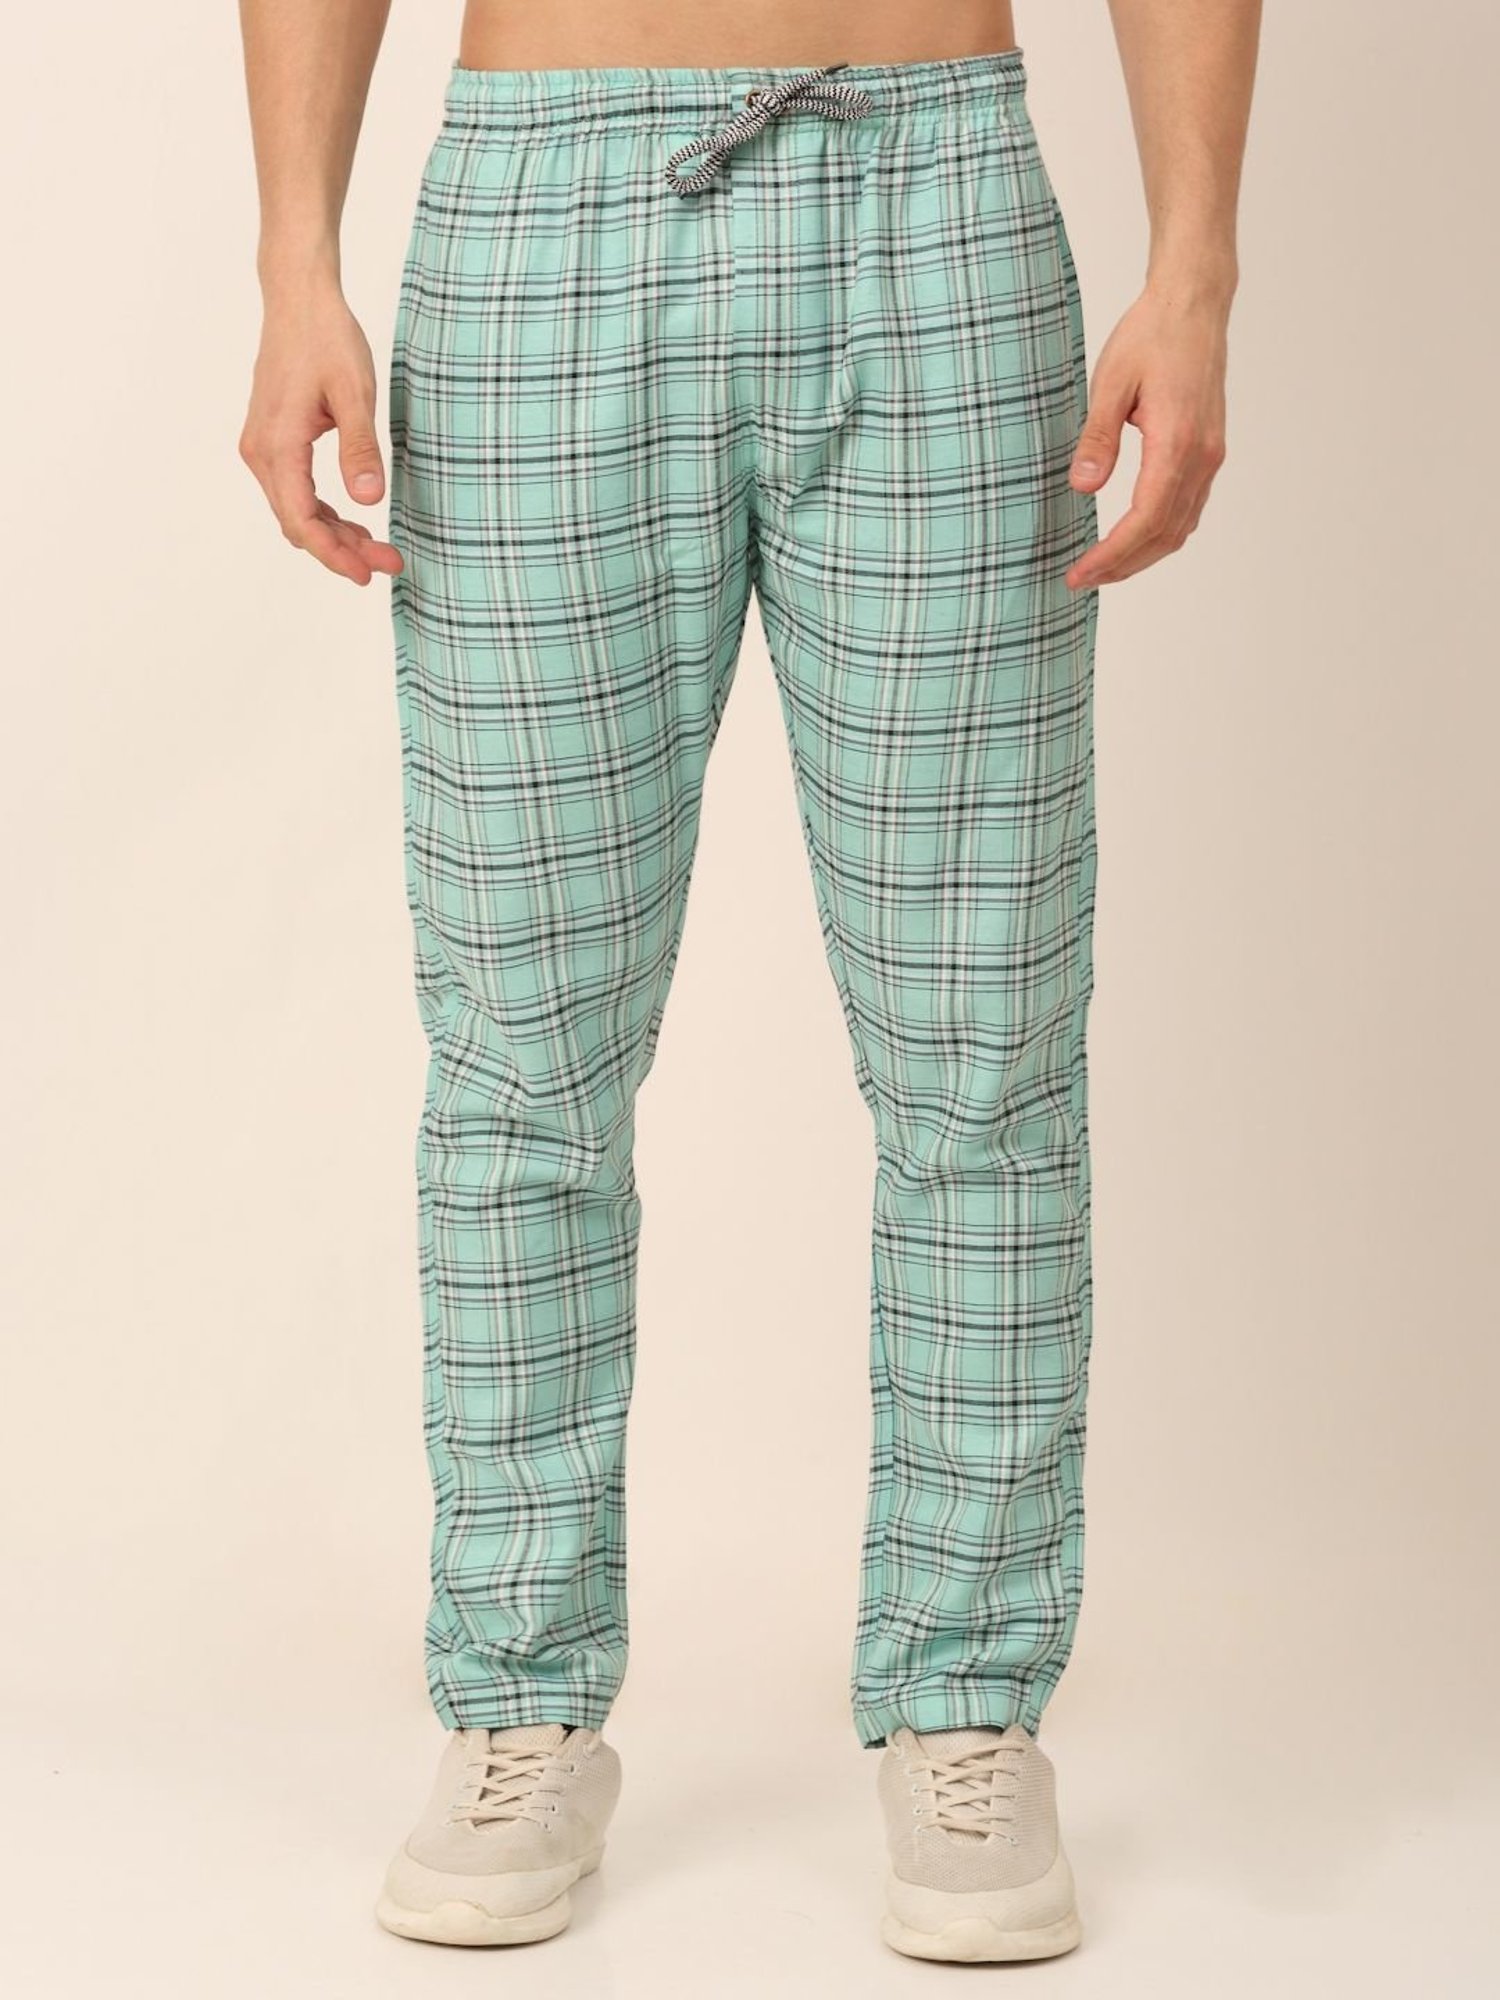 Cotton Mens Track Pants Gender  Male Pattern  Striped at Rs 500  Piece  in Kadapa